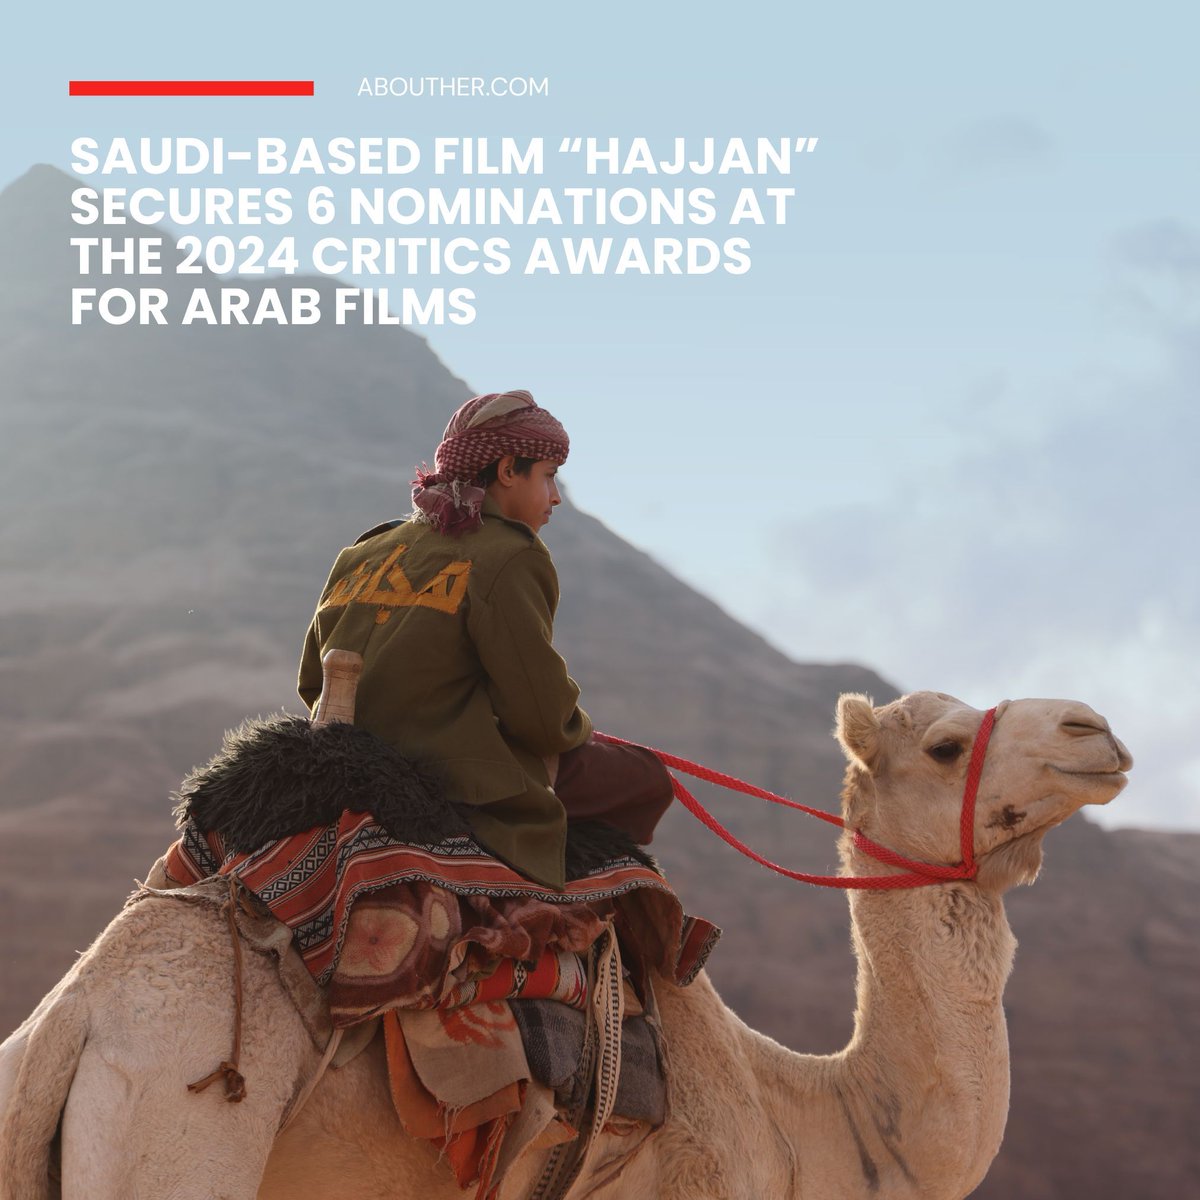 Saudi-based film 'Hajjan' is competing in six categories at the 2024 Critics Awards for Arab Films, securing nominations in the best feature film, best screenplay, best actor, best music, best cinematography and best editing categories. More: abouther.com/node/65731